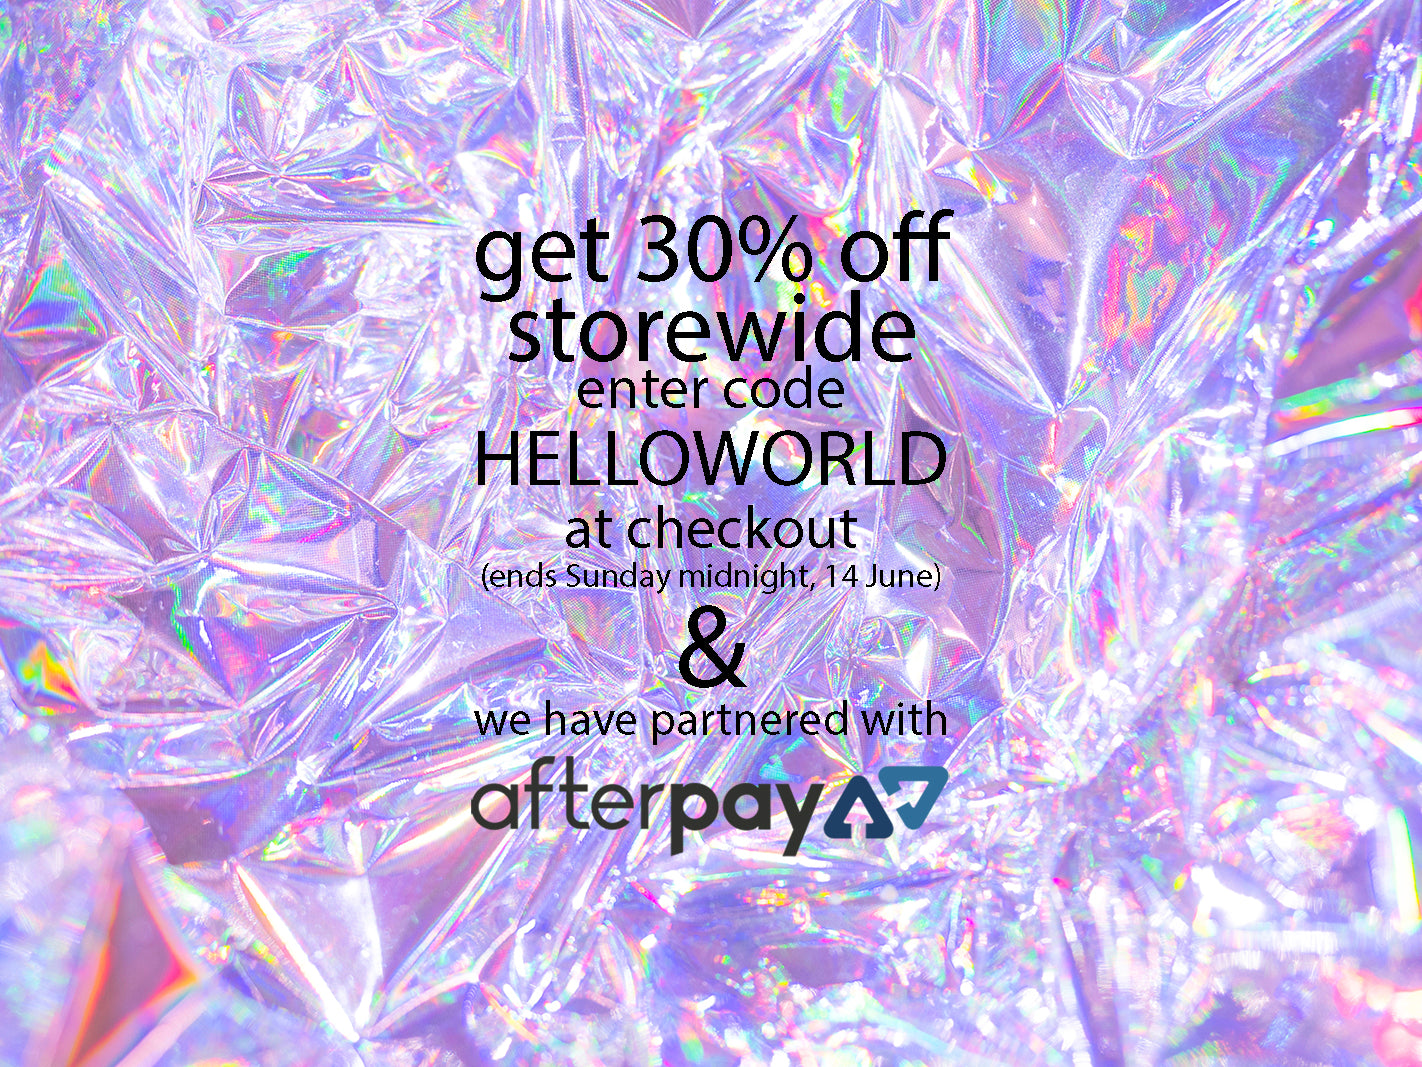 Get 30% off storewide, enter code HELLOWORLD at checkout. And we have partnered with Afterpay.